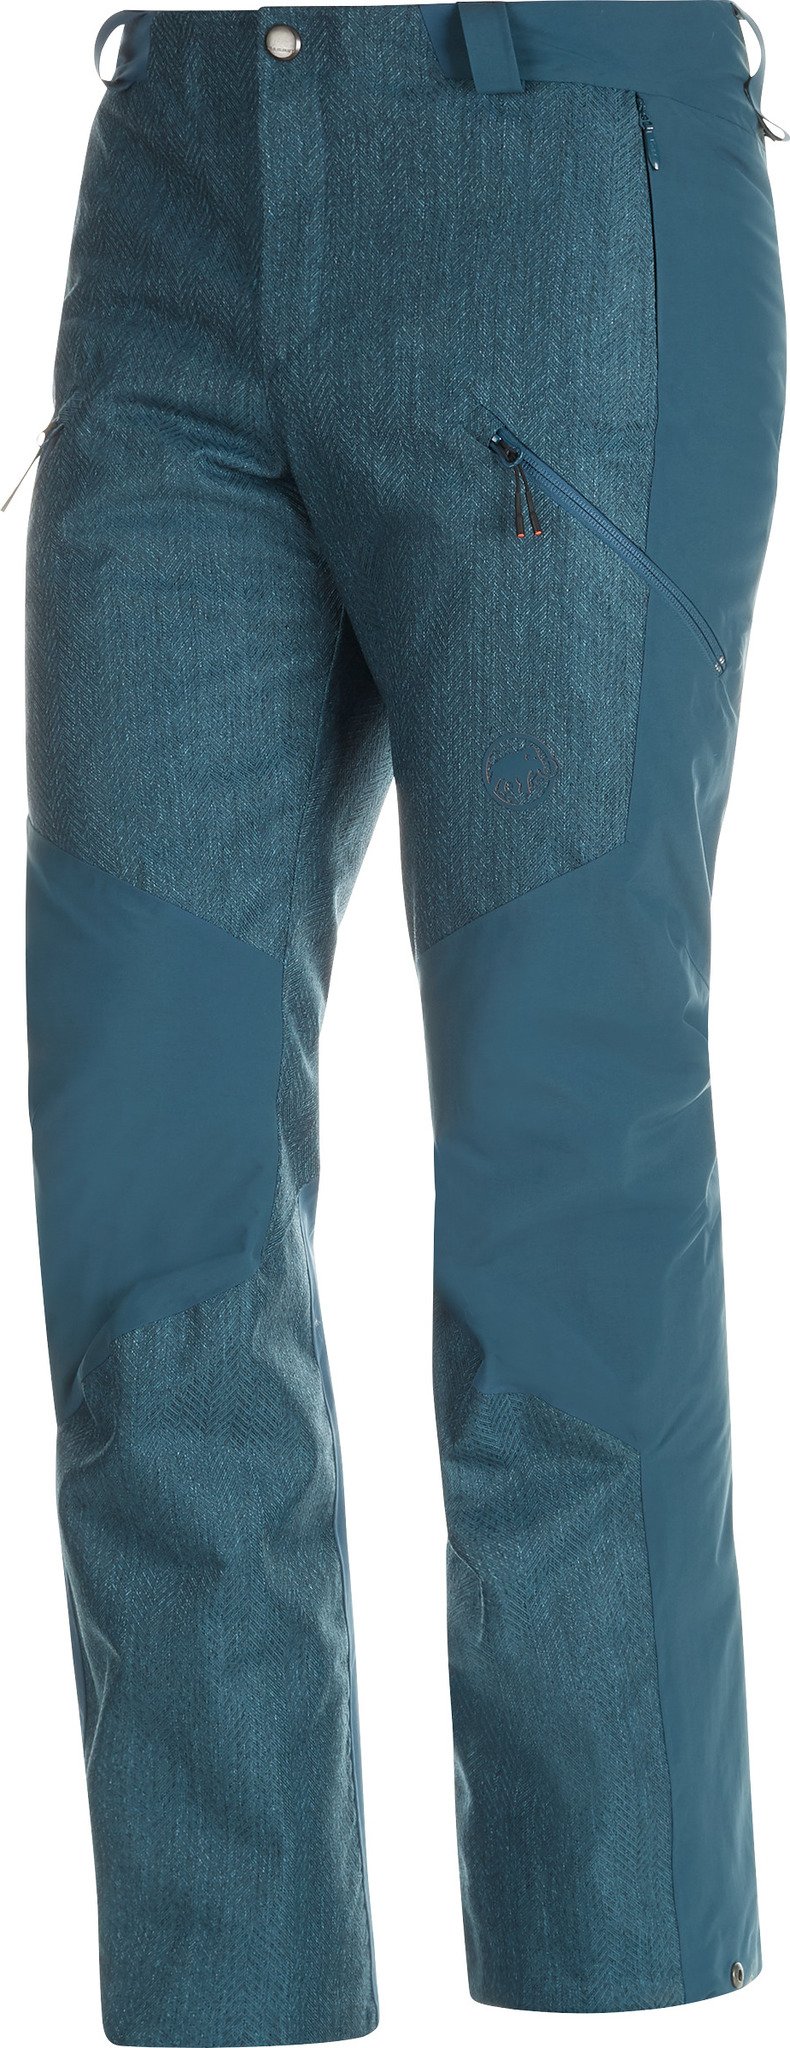 Mammut Cambrena HS Thermo Pants - Men's | The Last Hunt